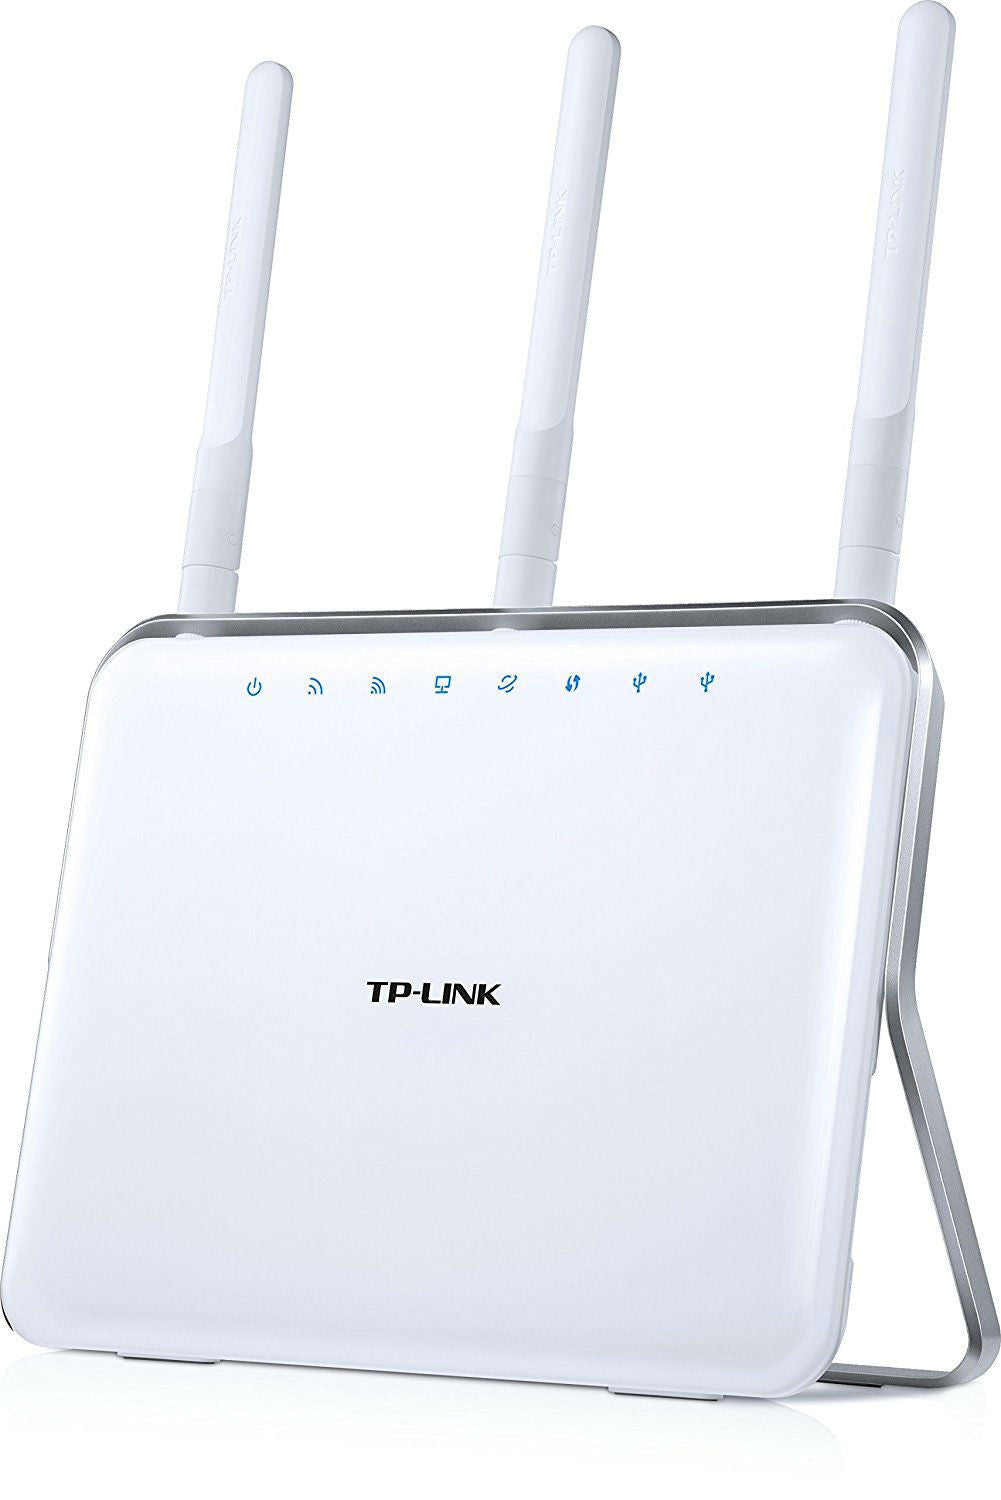 Wi Fi Routers For Fiber Optics Top Upgrade Your Ftth Network